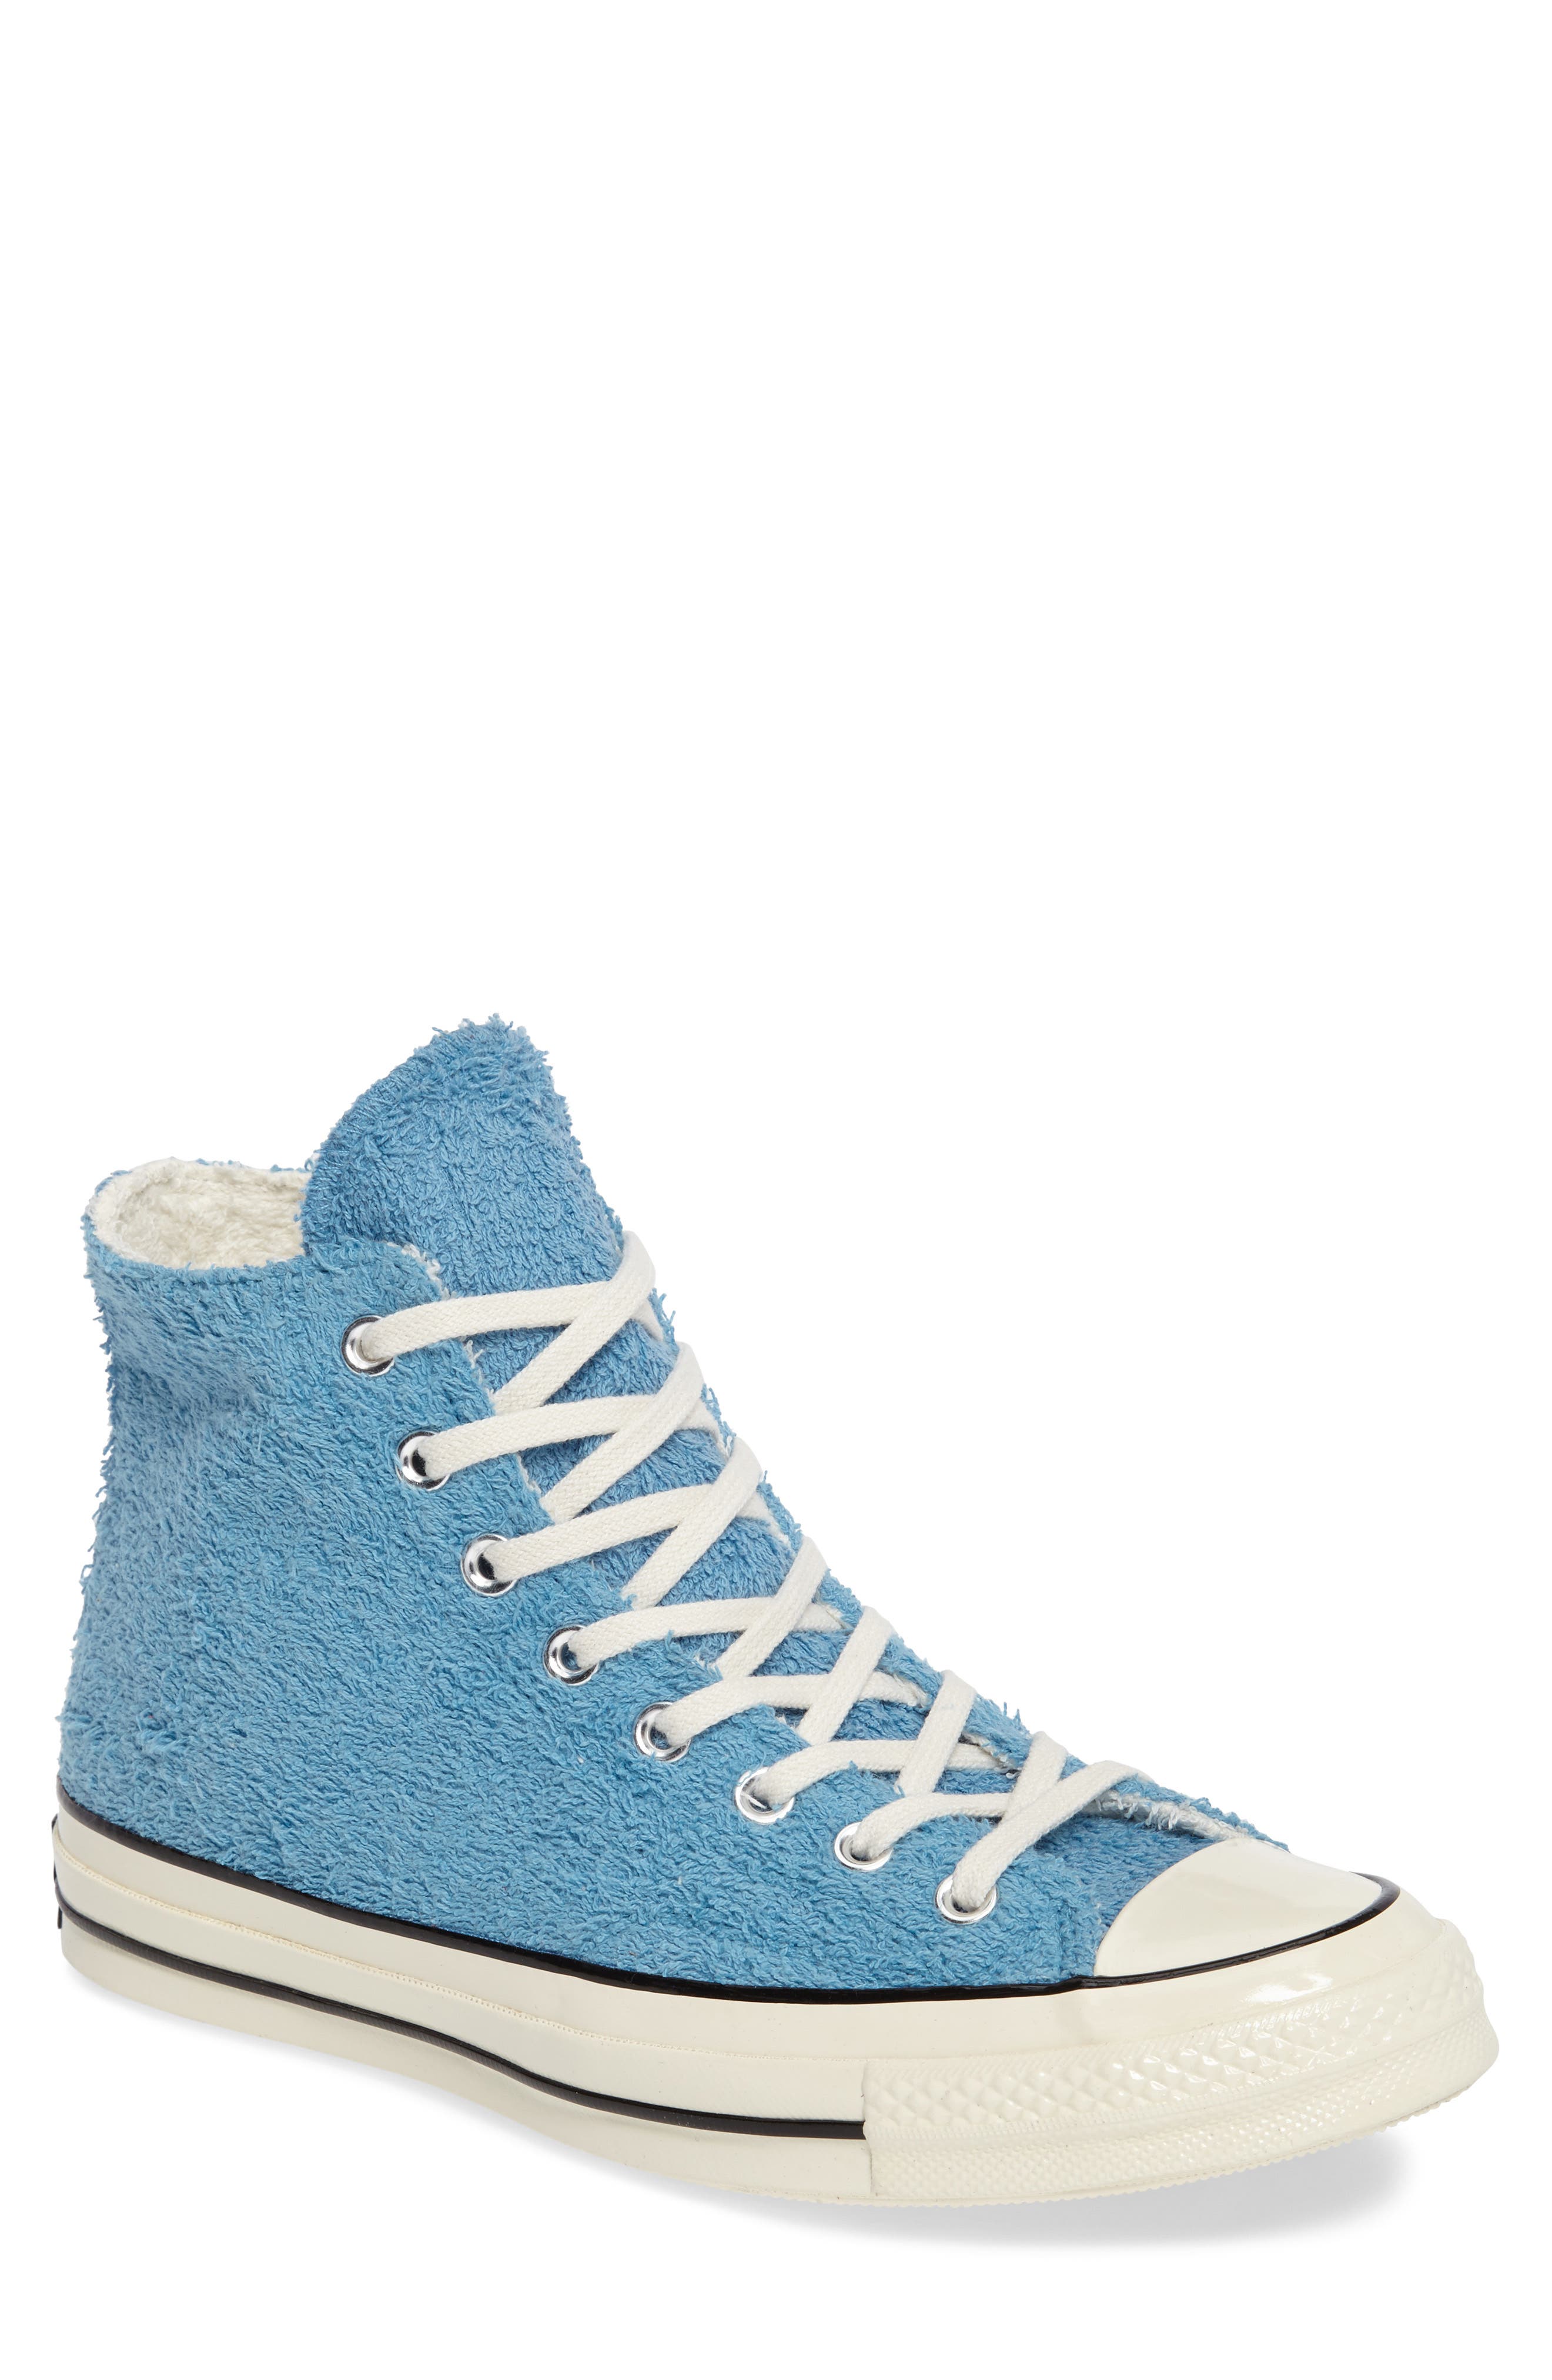 converse all star terry